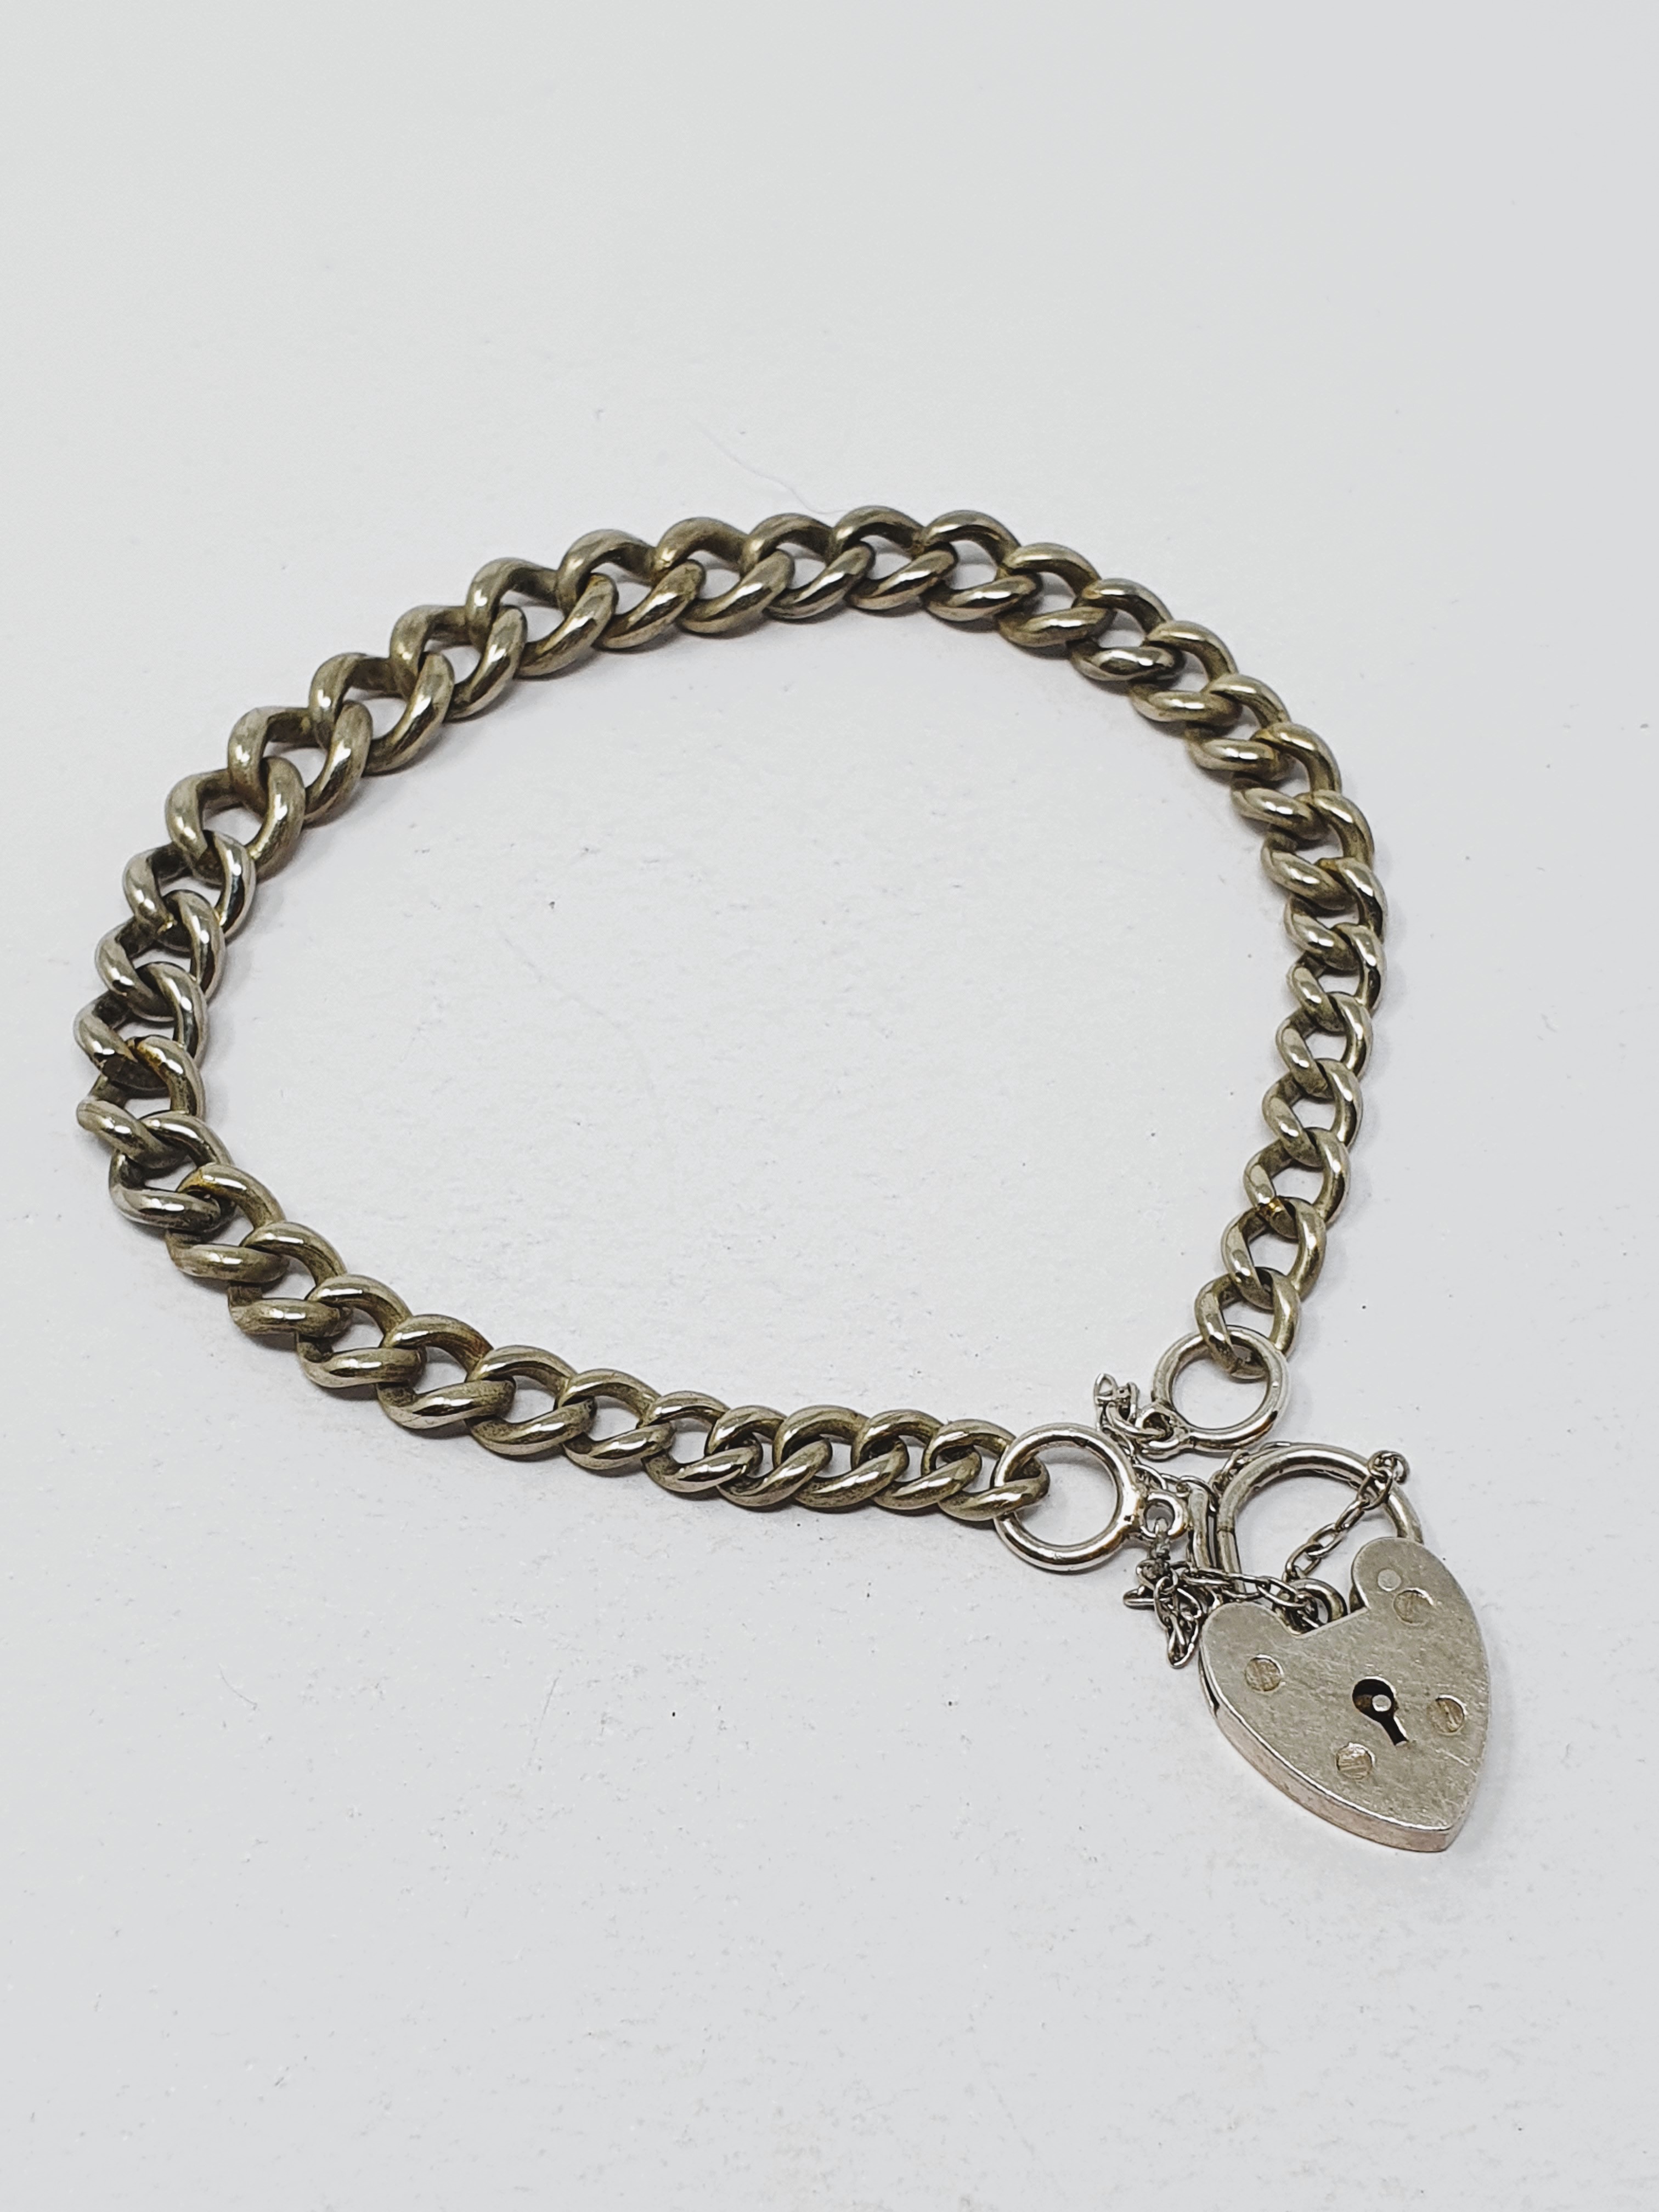 Sterling silver vintage charm bracelet, graduated curb links, padlock fastener and safety chain, - Image 3 of 3